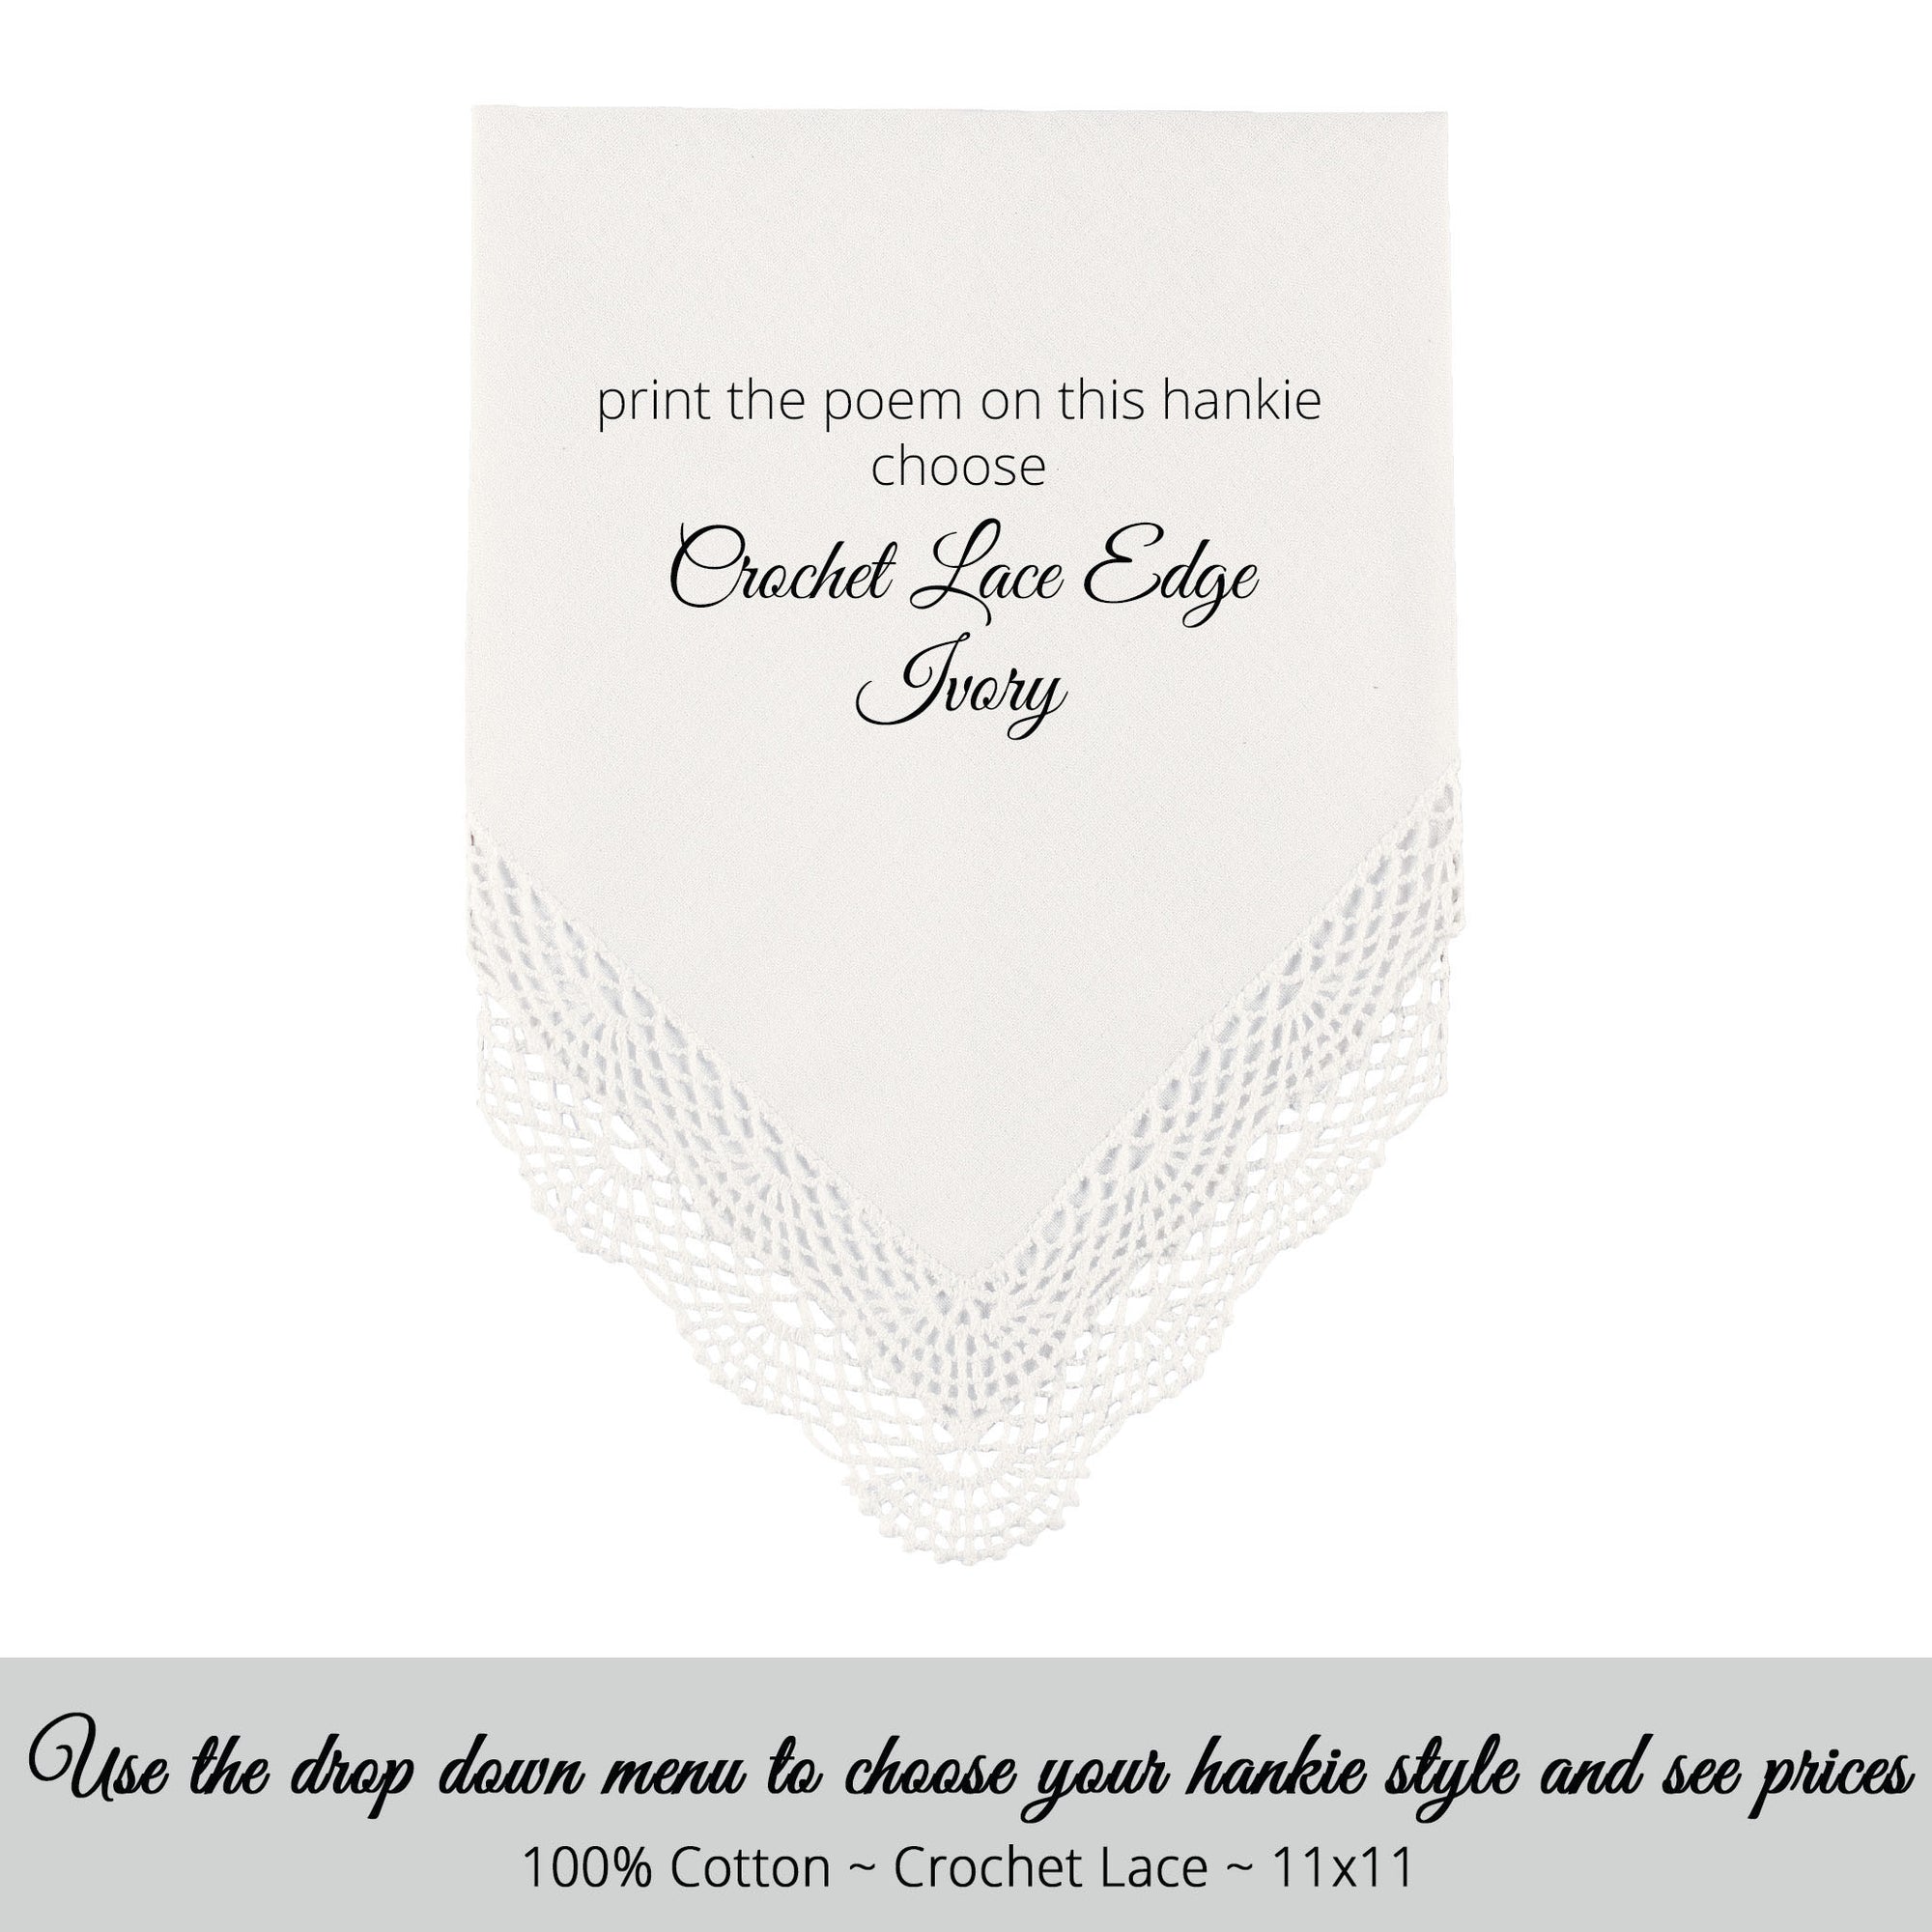 Wedding handkerchief ivory with crochet lace edge for poem printed hankie for the mother of the bride